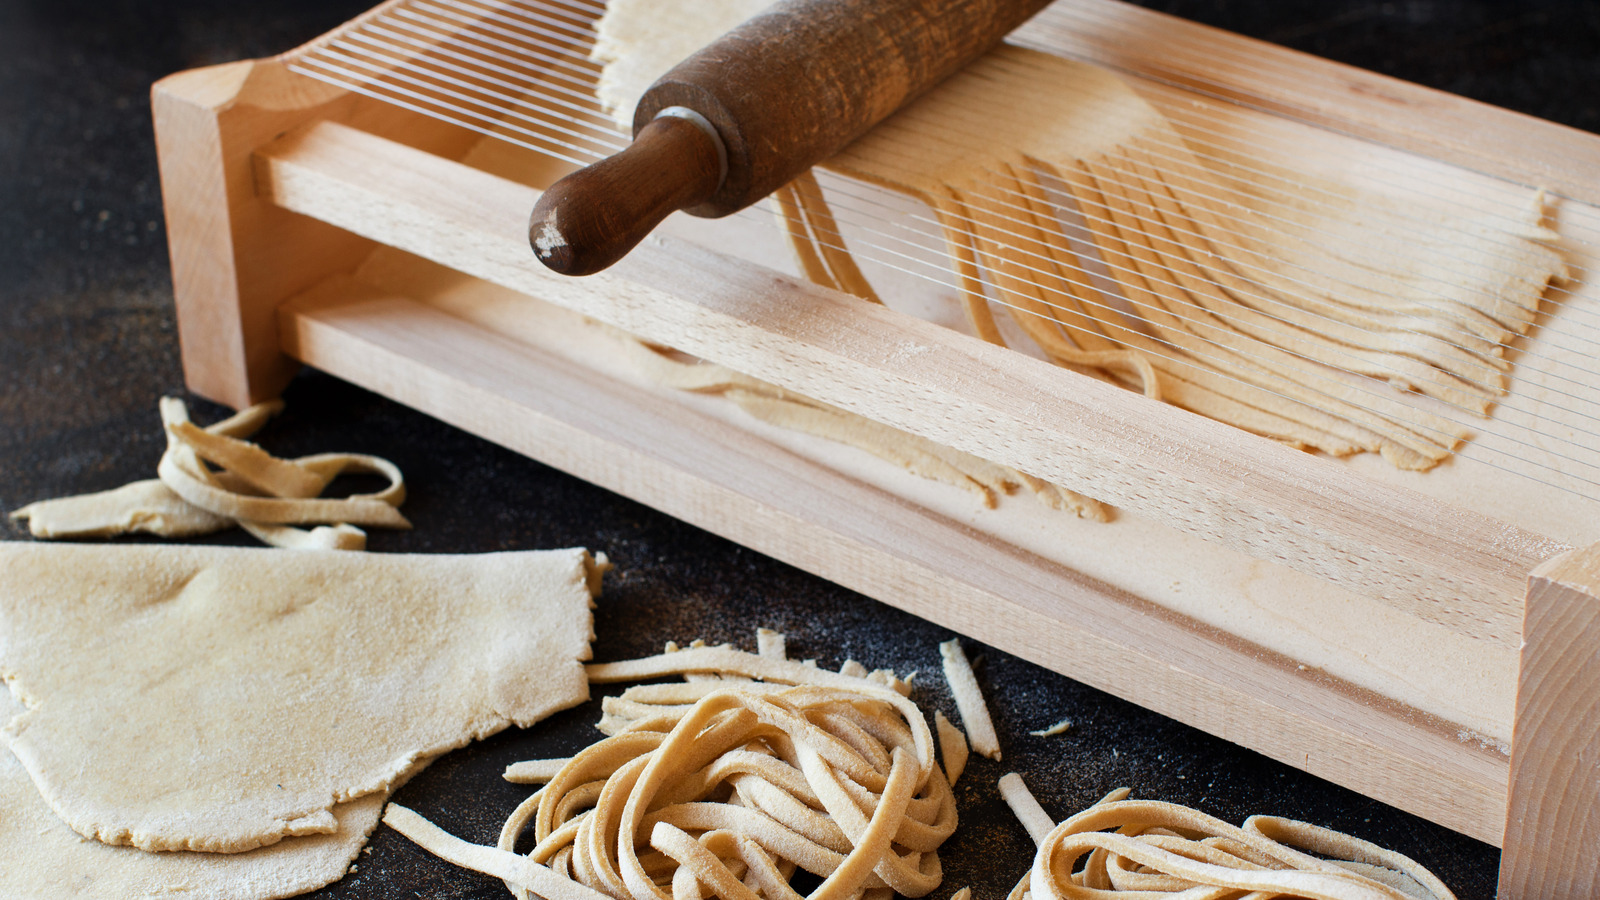 The Gadget Every Home Cook Needs For Quicker Fresh Pasta